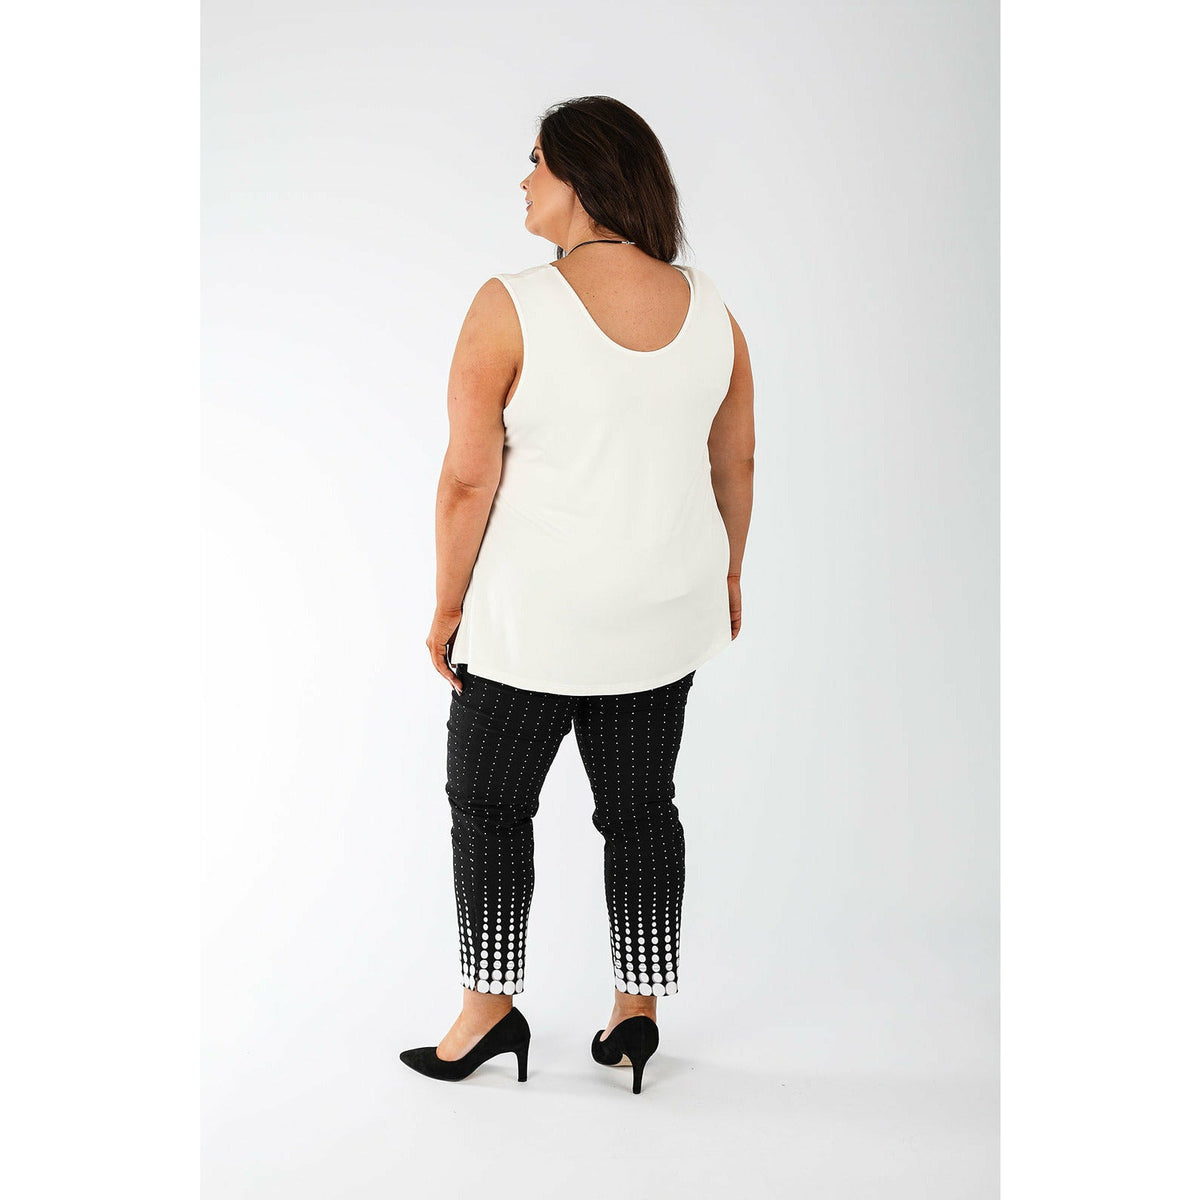 Robell Trousers in Black and White Dot - Wardrobe Plus